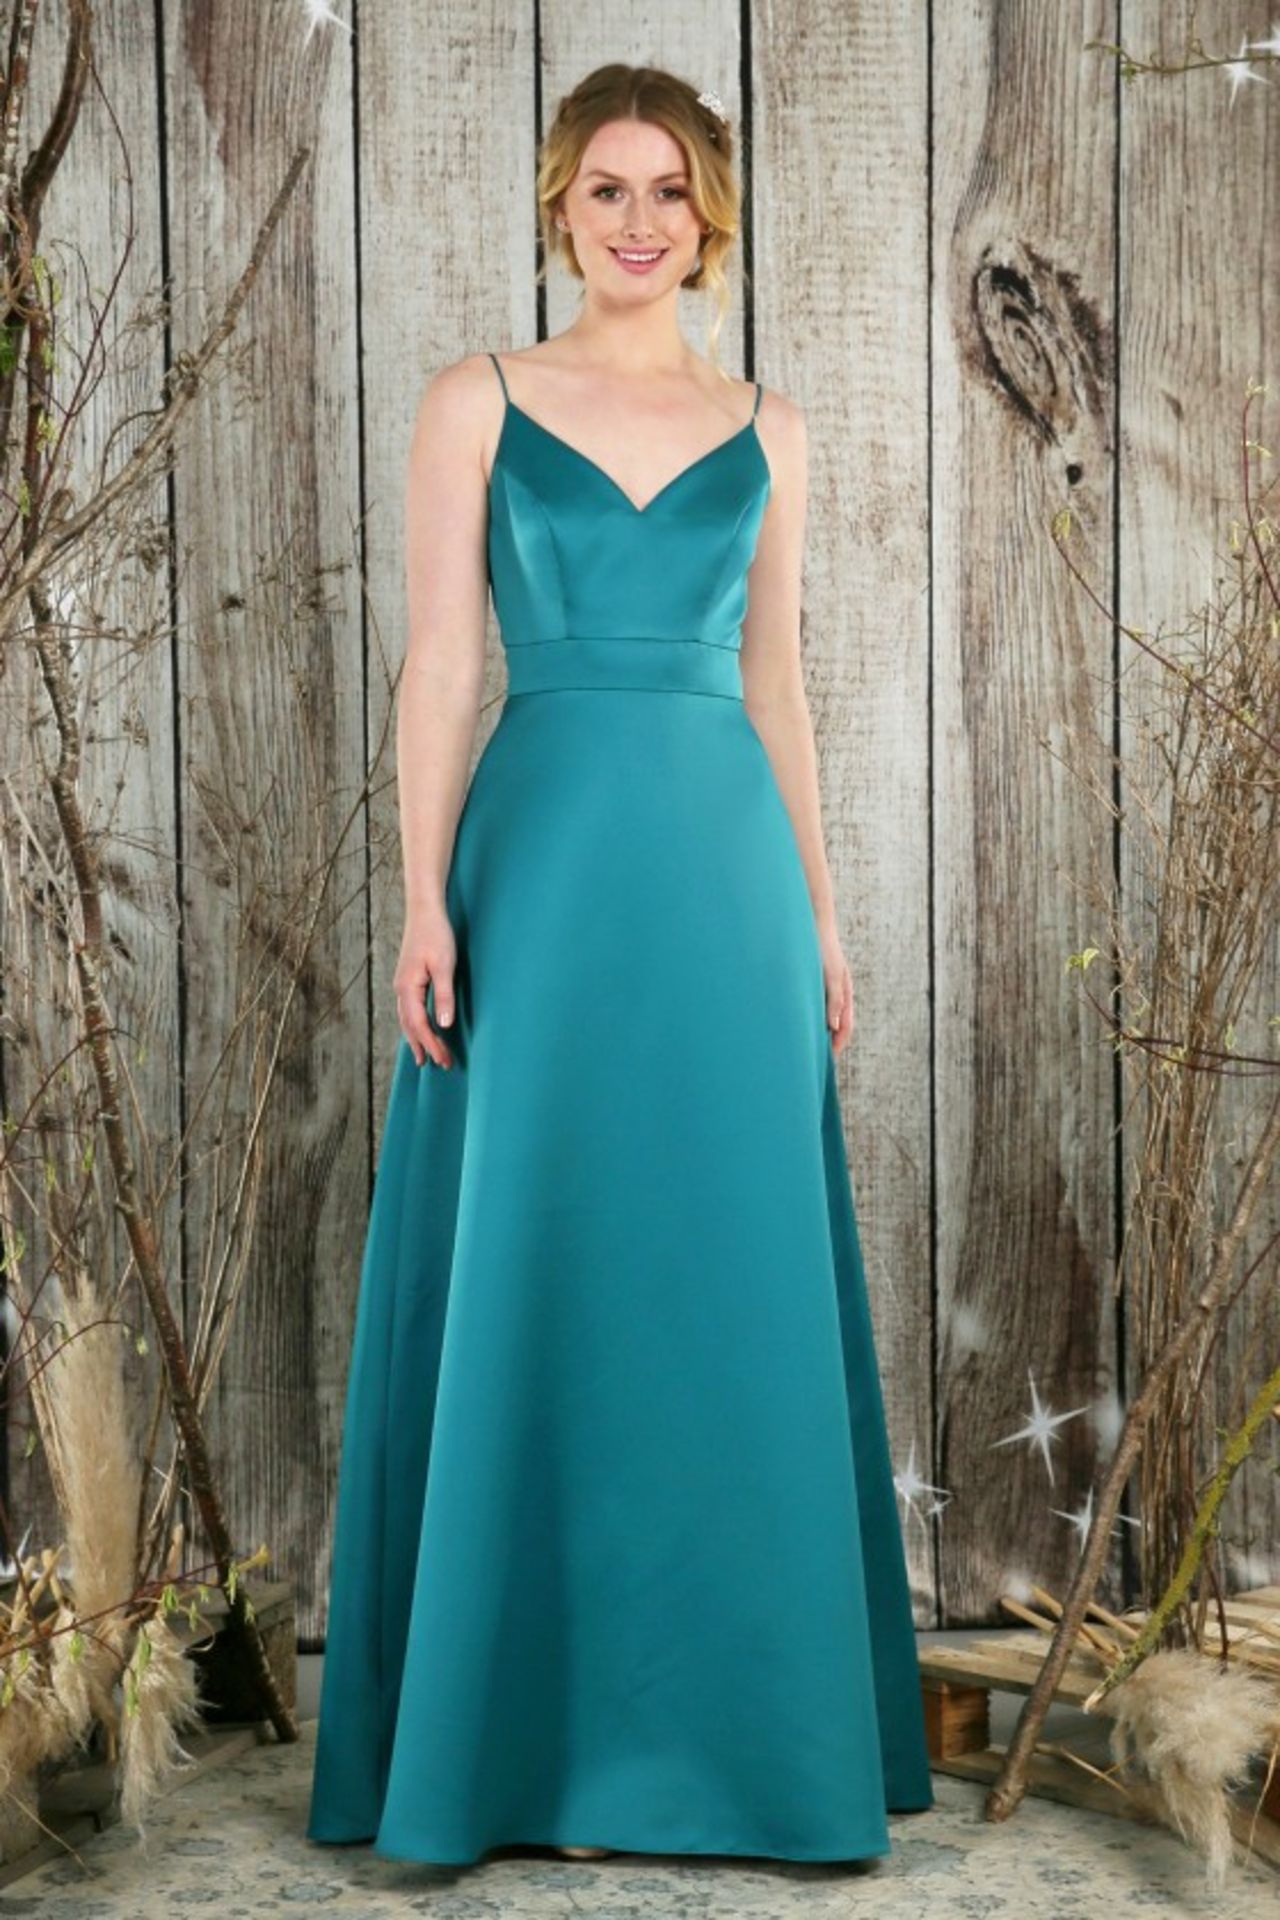 Bridesmaid Or Prom Dresses From Richard Designs Mixed Sizes and Colours. 10 Dresses - Image 4 of 9